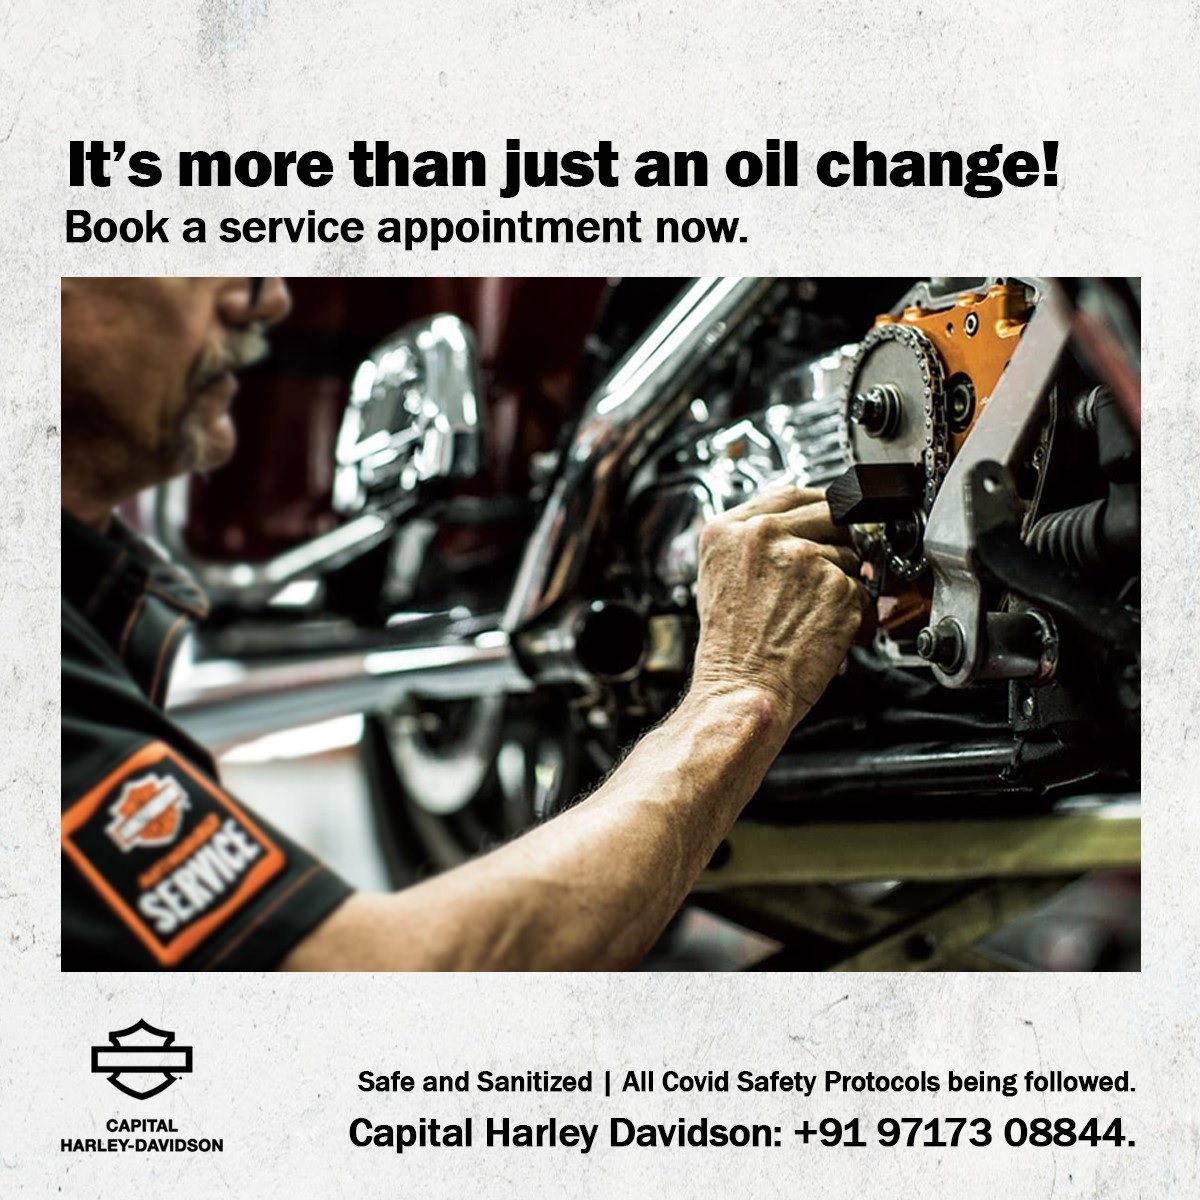 Keep your beloved cruiser in optimum condition for upcoming adventures.

Schedule a service appointment today. +91 97173 08844

#harleydavidson #harleydavidsonindia #capitalharley #harleyservice #capitalharleydelhi https://t.co/dunnfFbC5f